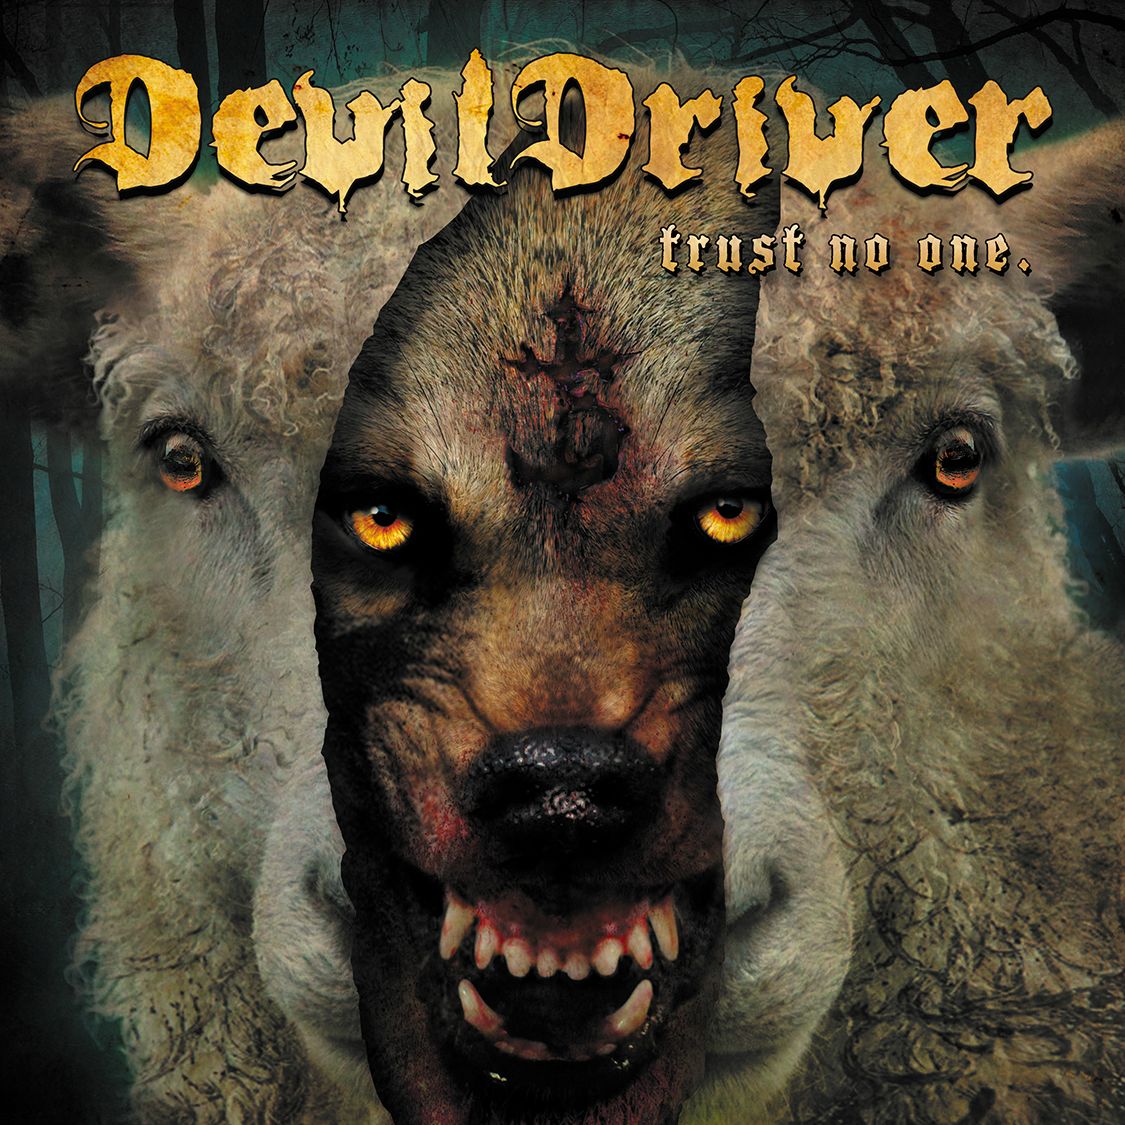 DEVILDRIVER Confirm Friday May 13, 2016 Release Date For New Album Trust No One on Napalm Records